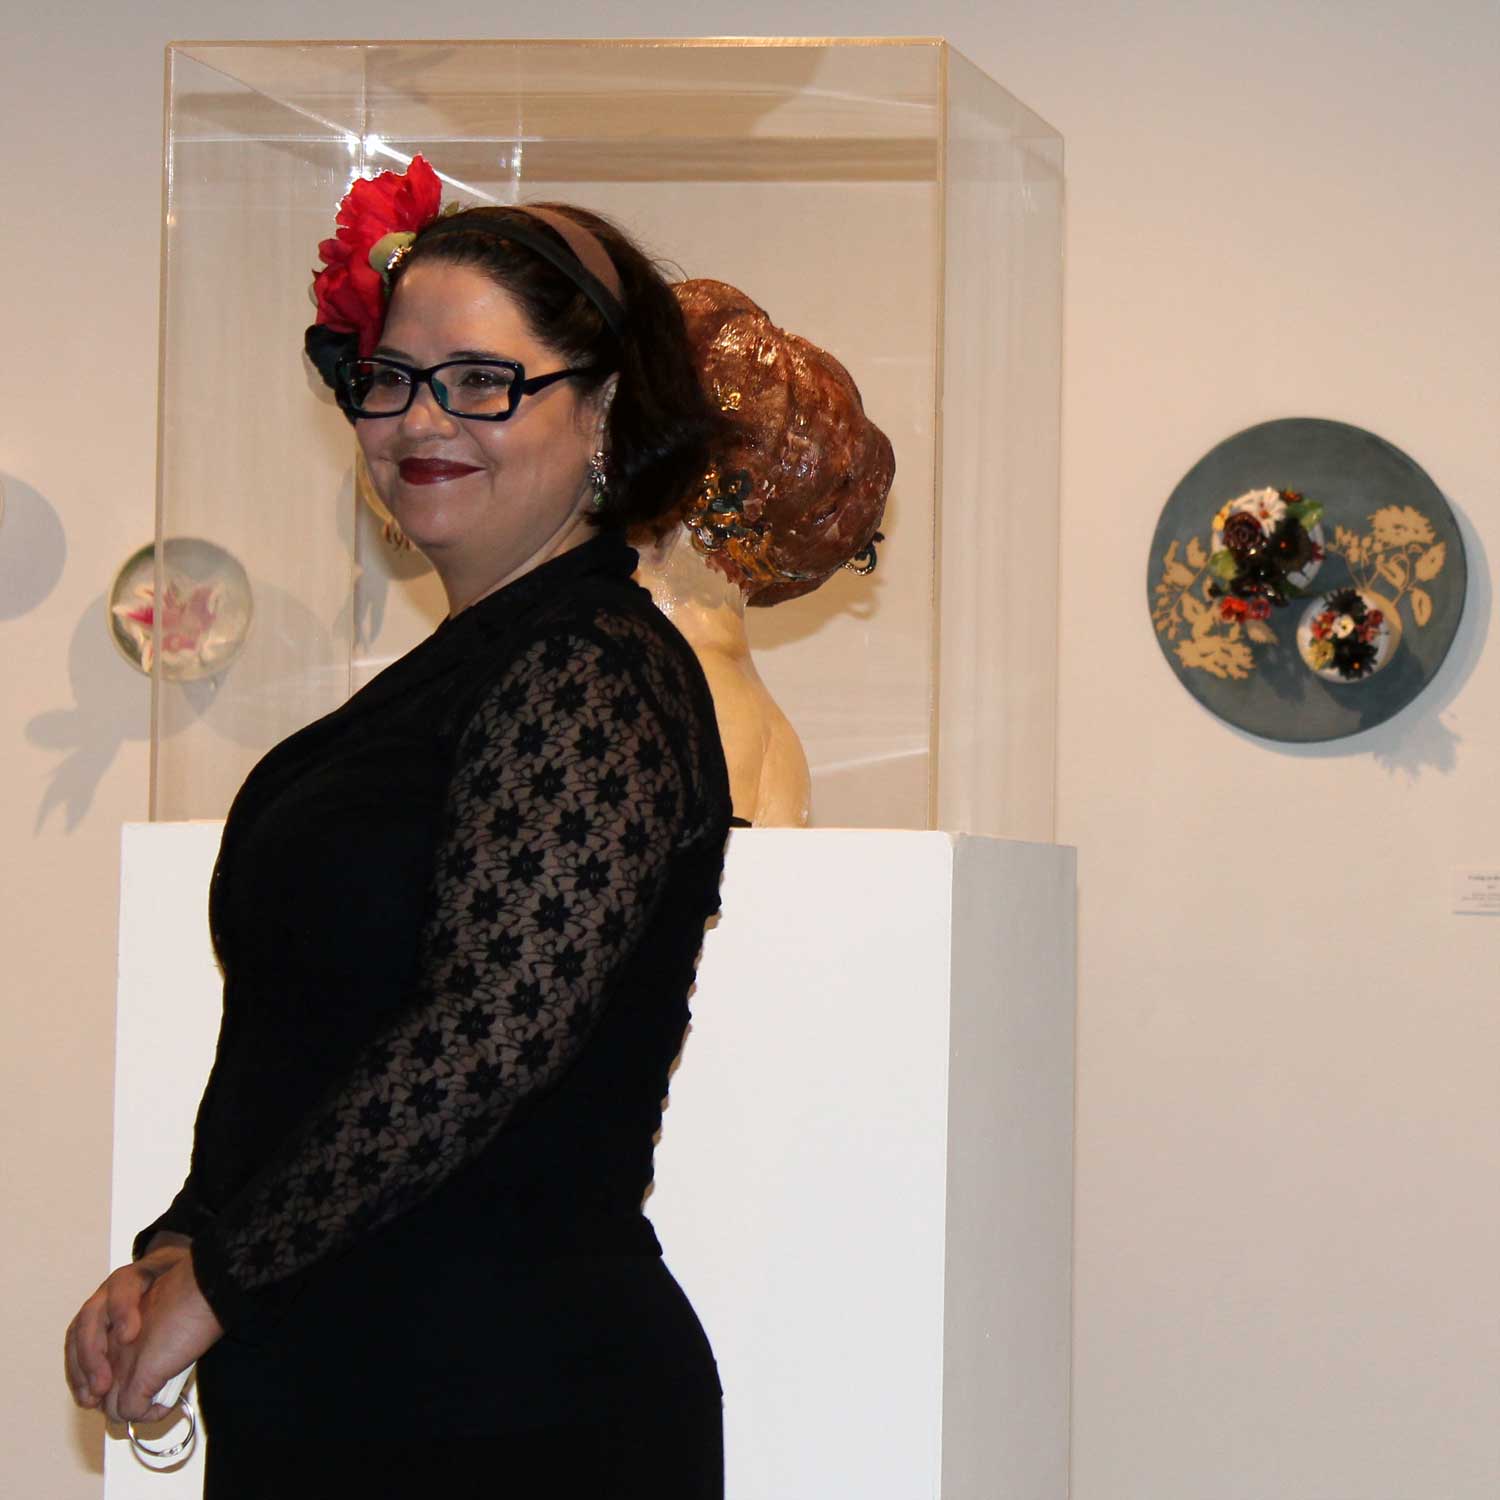 Photo: Gallery Talk at UHCL Art Gallery with artist Bernadette Esperanza Torres. Photo by The Signal reporter Cindy Brady.